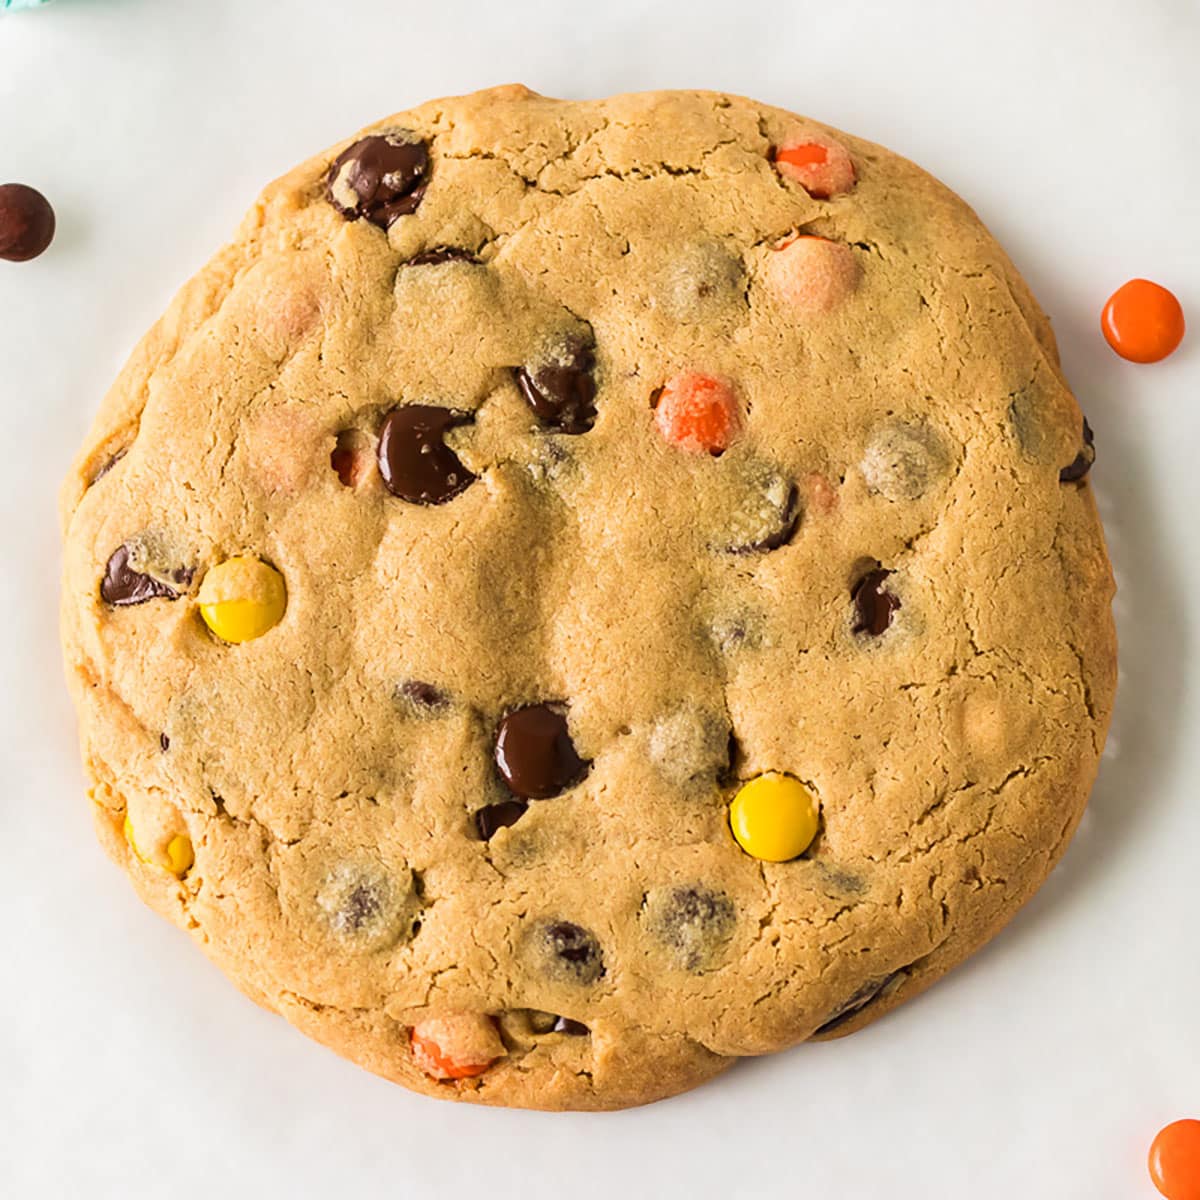 https://www.persnicketyplates.com/wp-content/uploads/2012/01/giant-peanut-butter-cookie-reeses-13-SQUARE.jpg